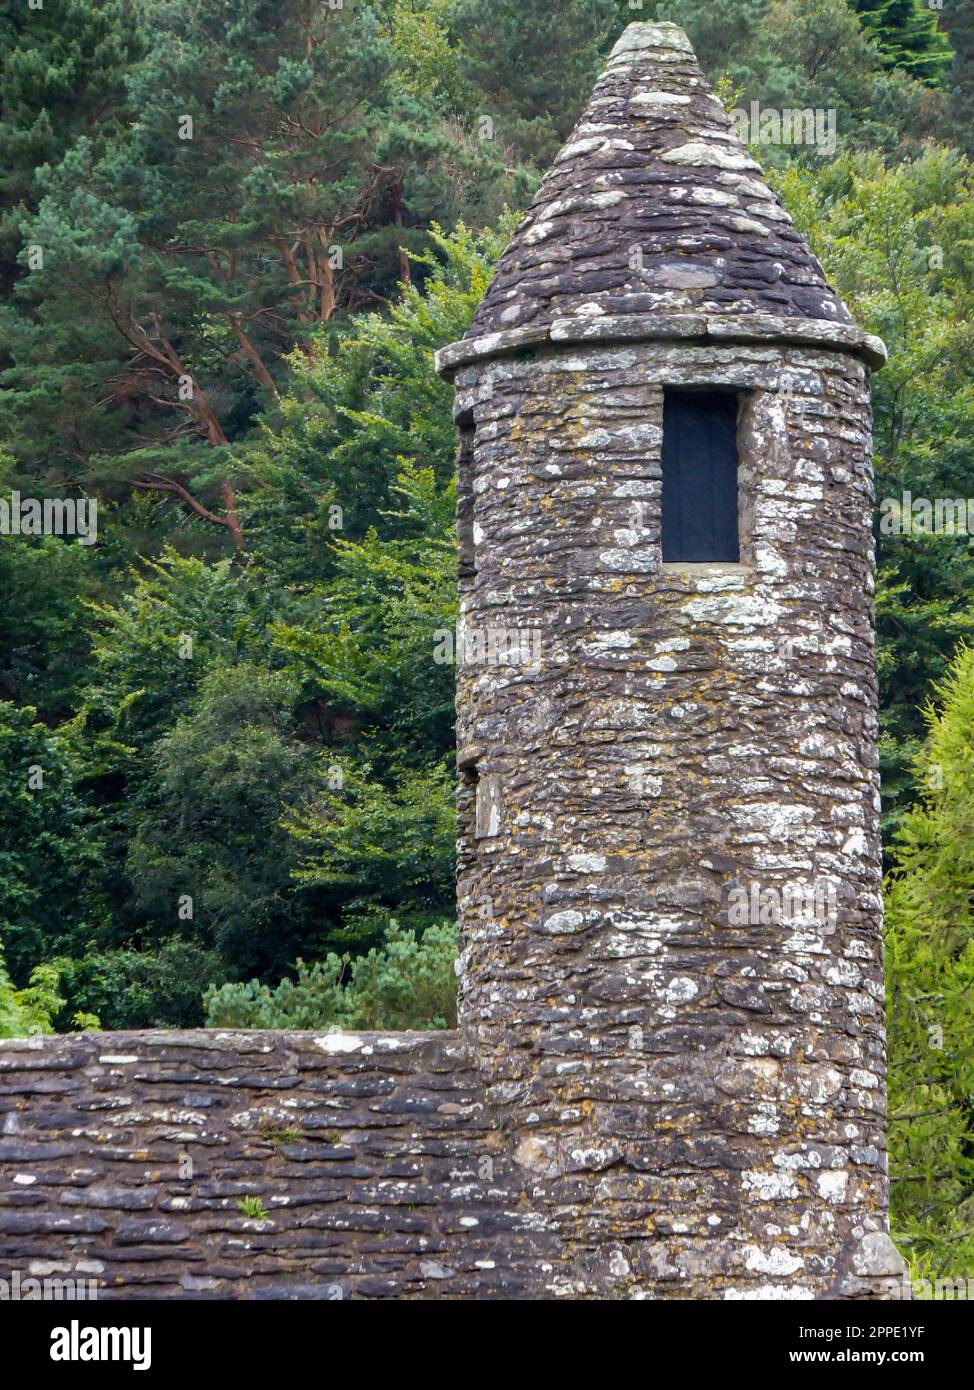 The tower of the ancient Saint Kevin's Kitchen at Glendalough Monastic City in Wicklow Mountains National Park, Ireland. Stock Photo